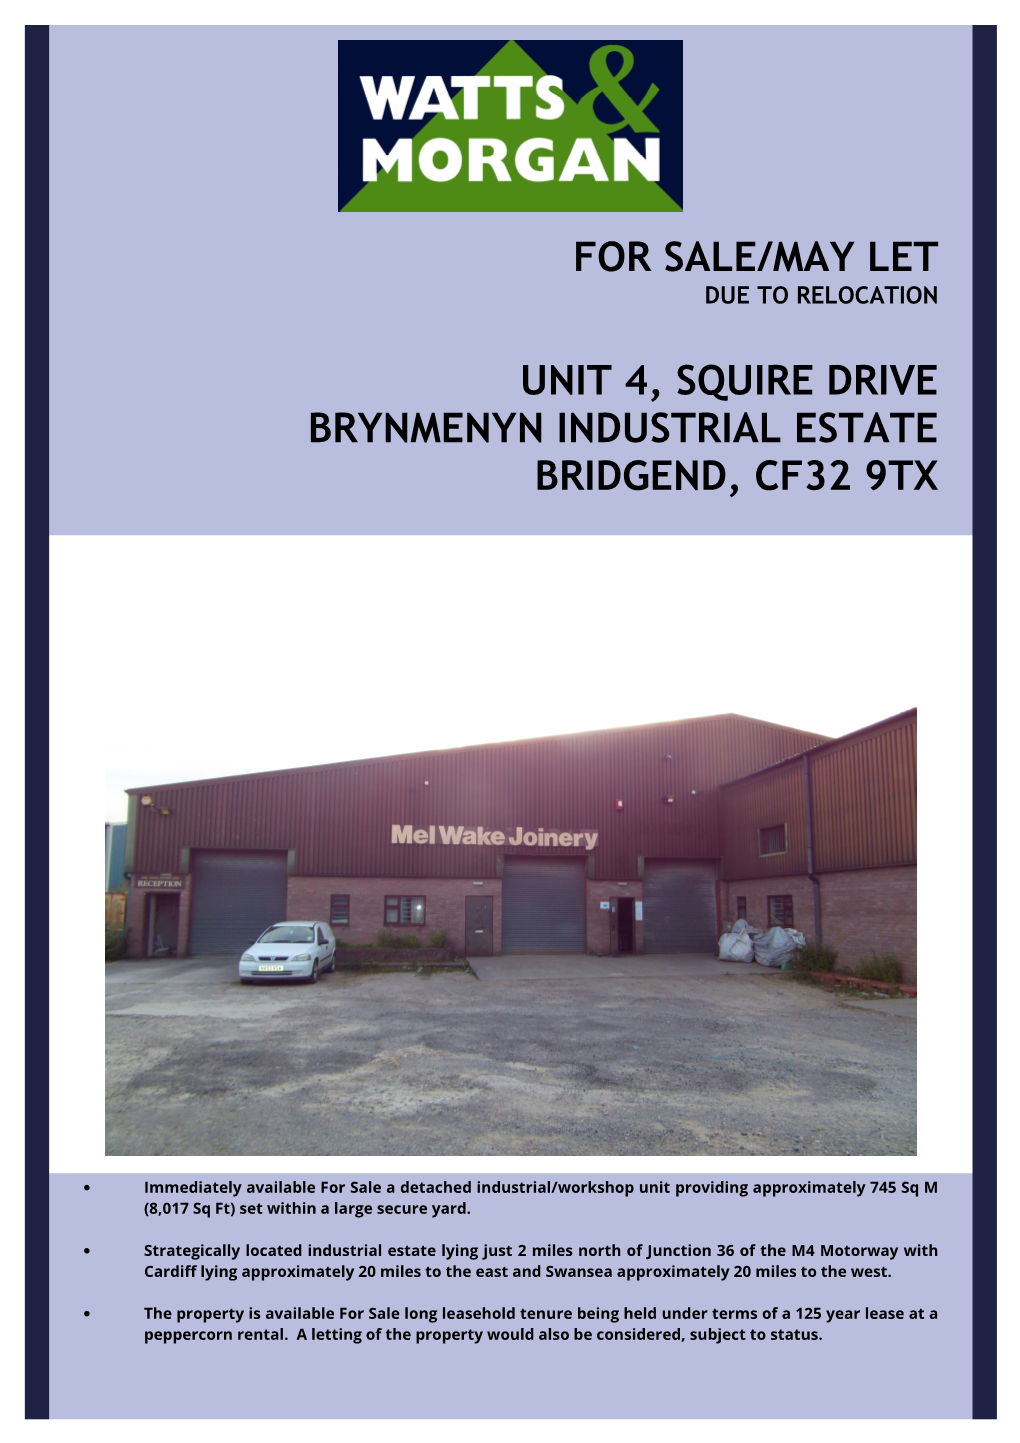 For Sale/May Let Unit 4, Squire Drive Brynmenyn Industrial